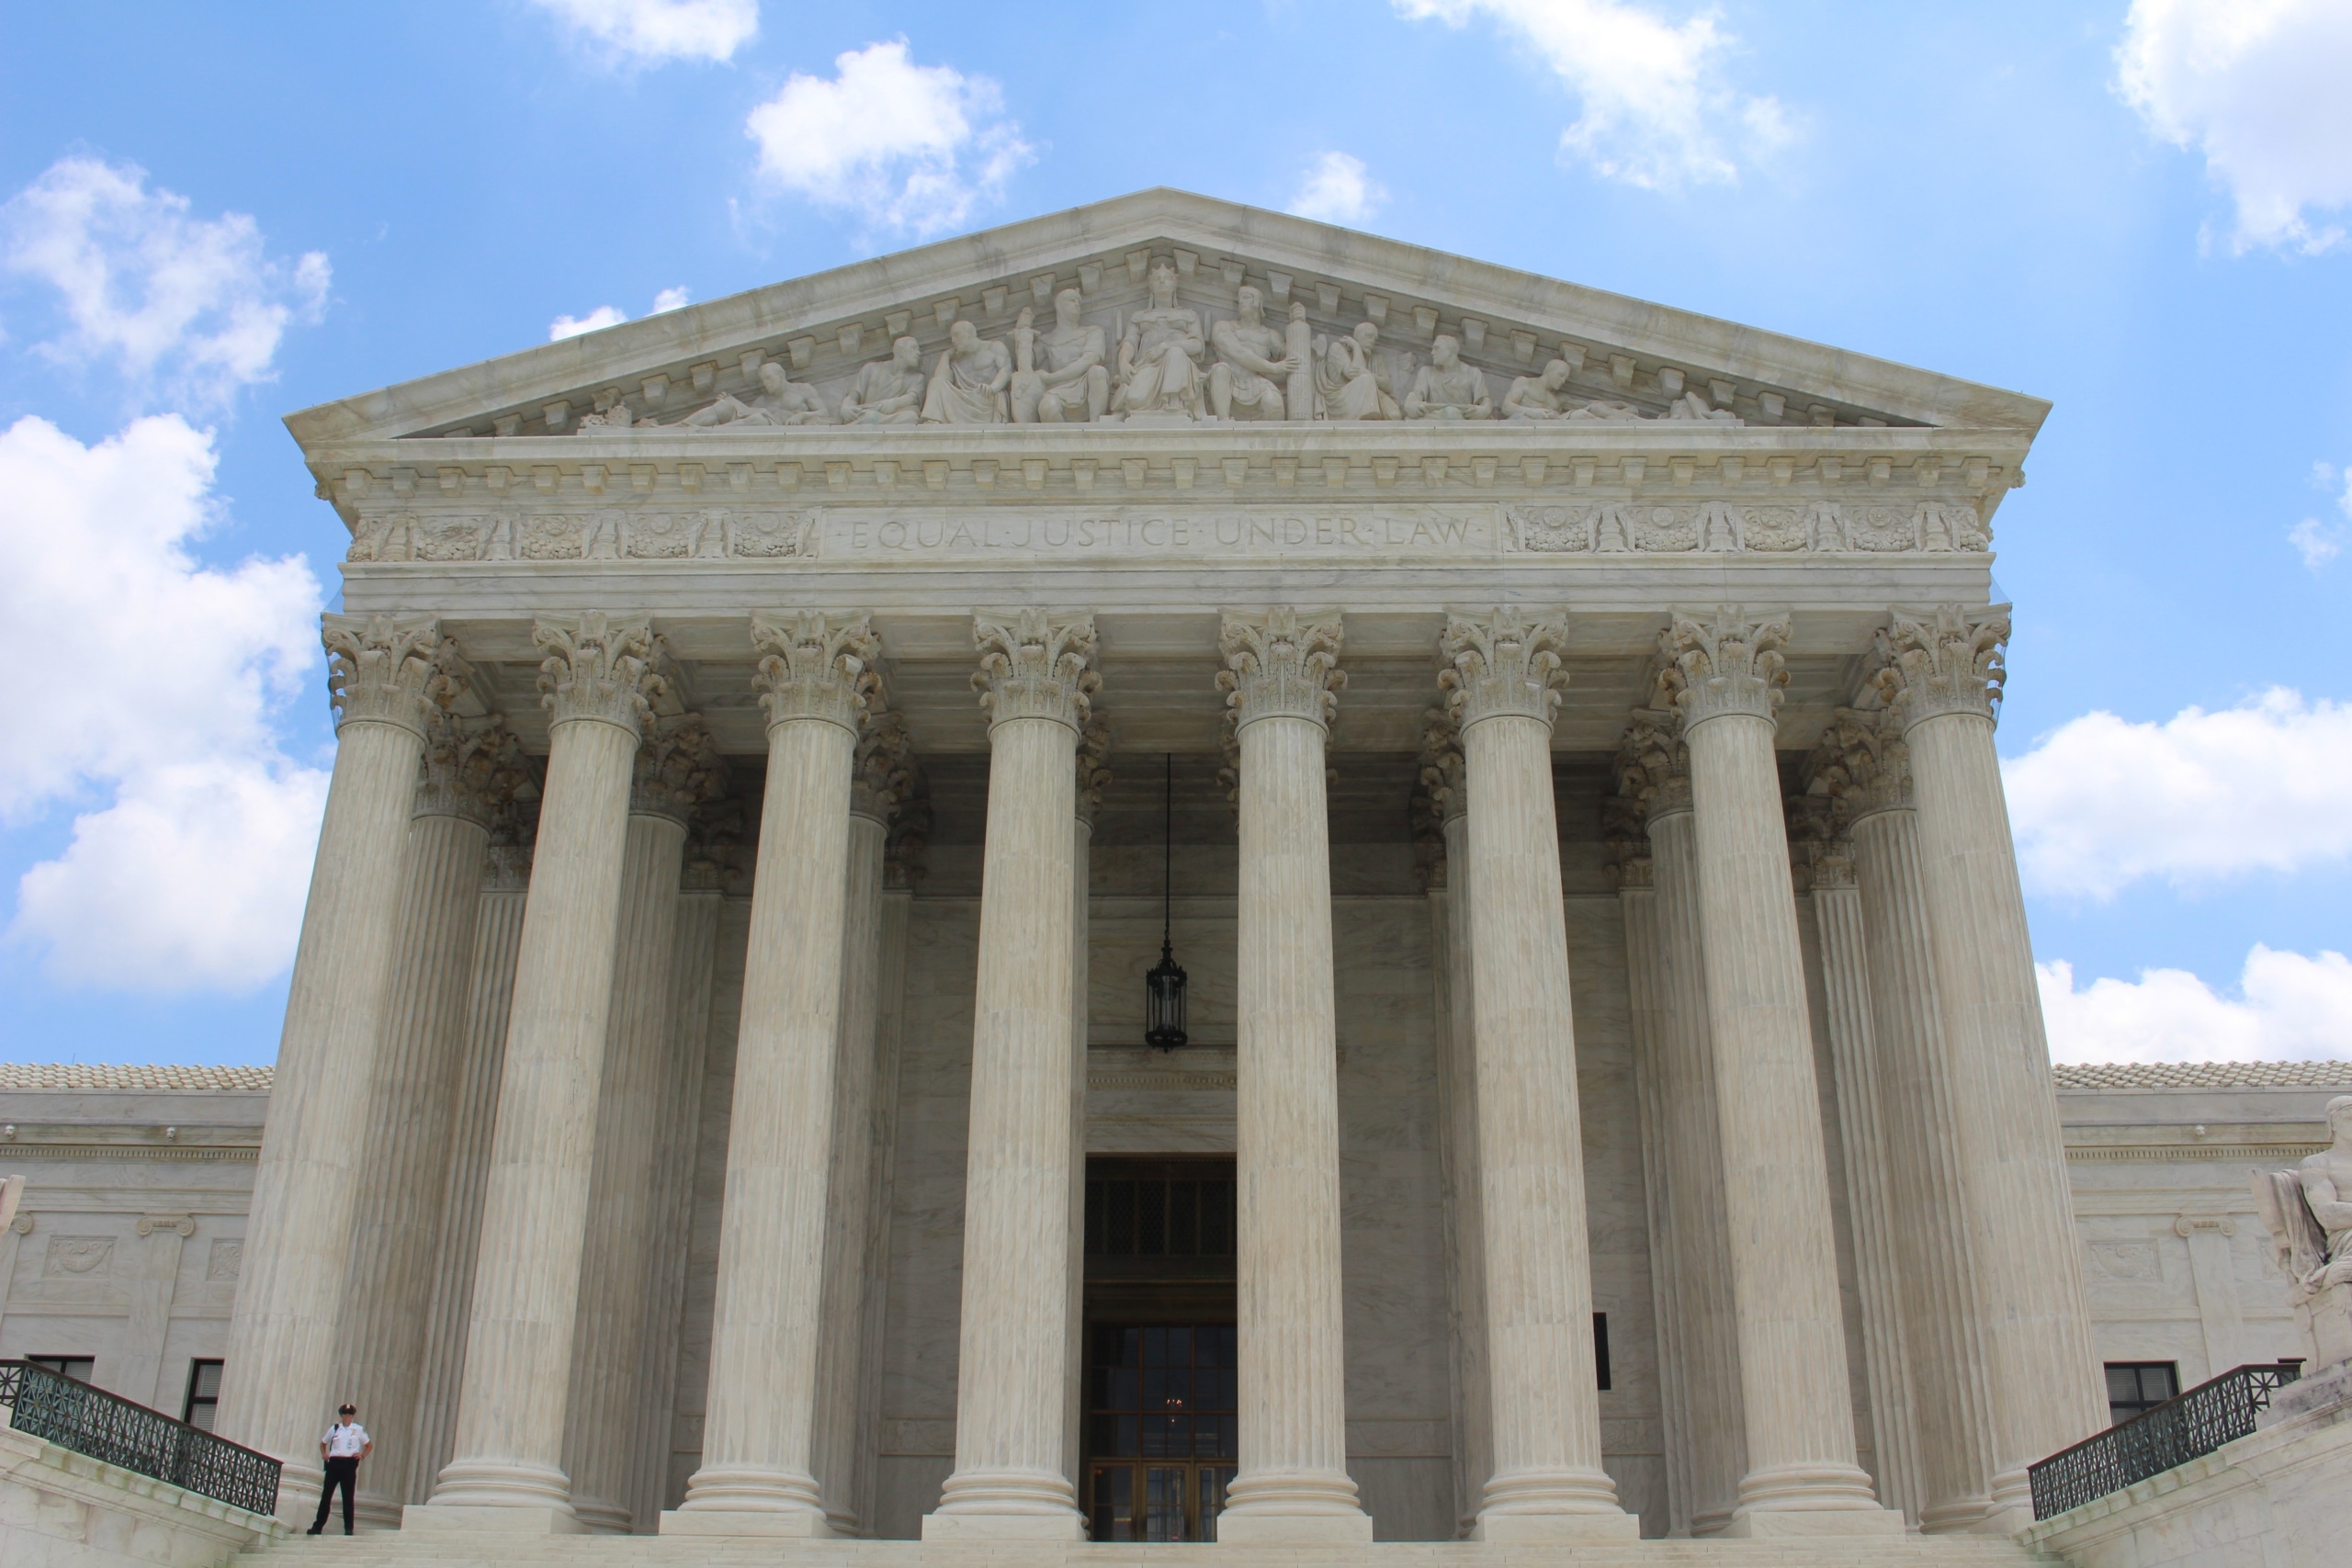 Image of the U.S. Supreme Court building in Washington, DC.